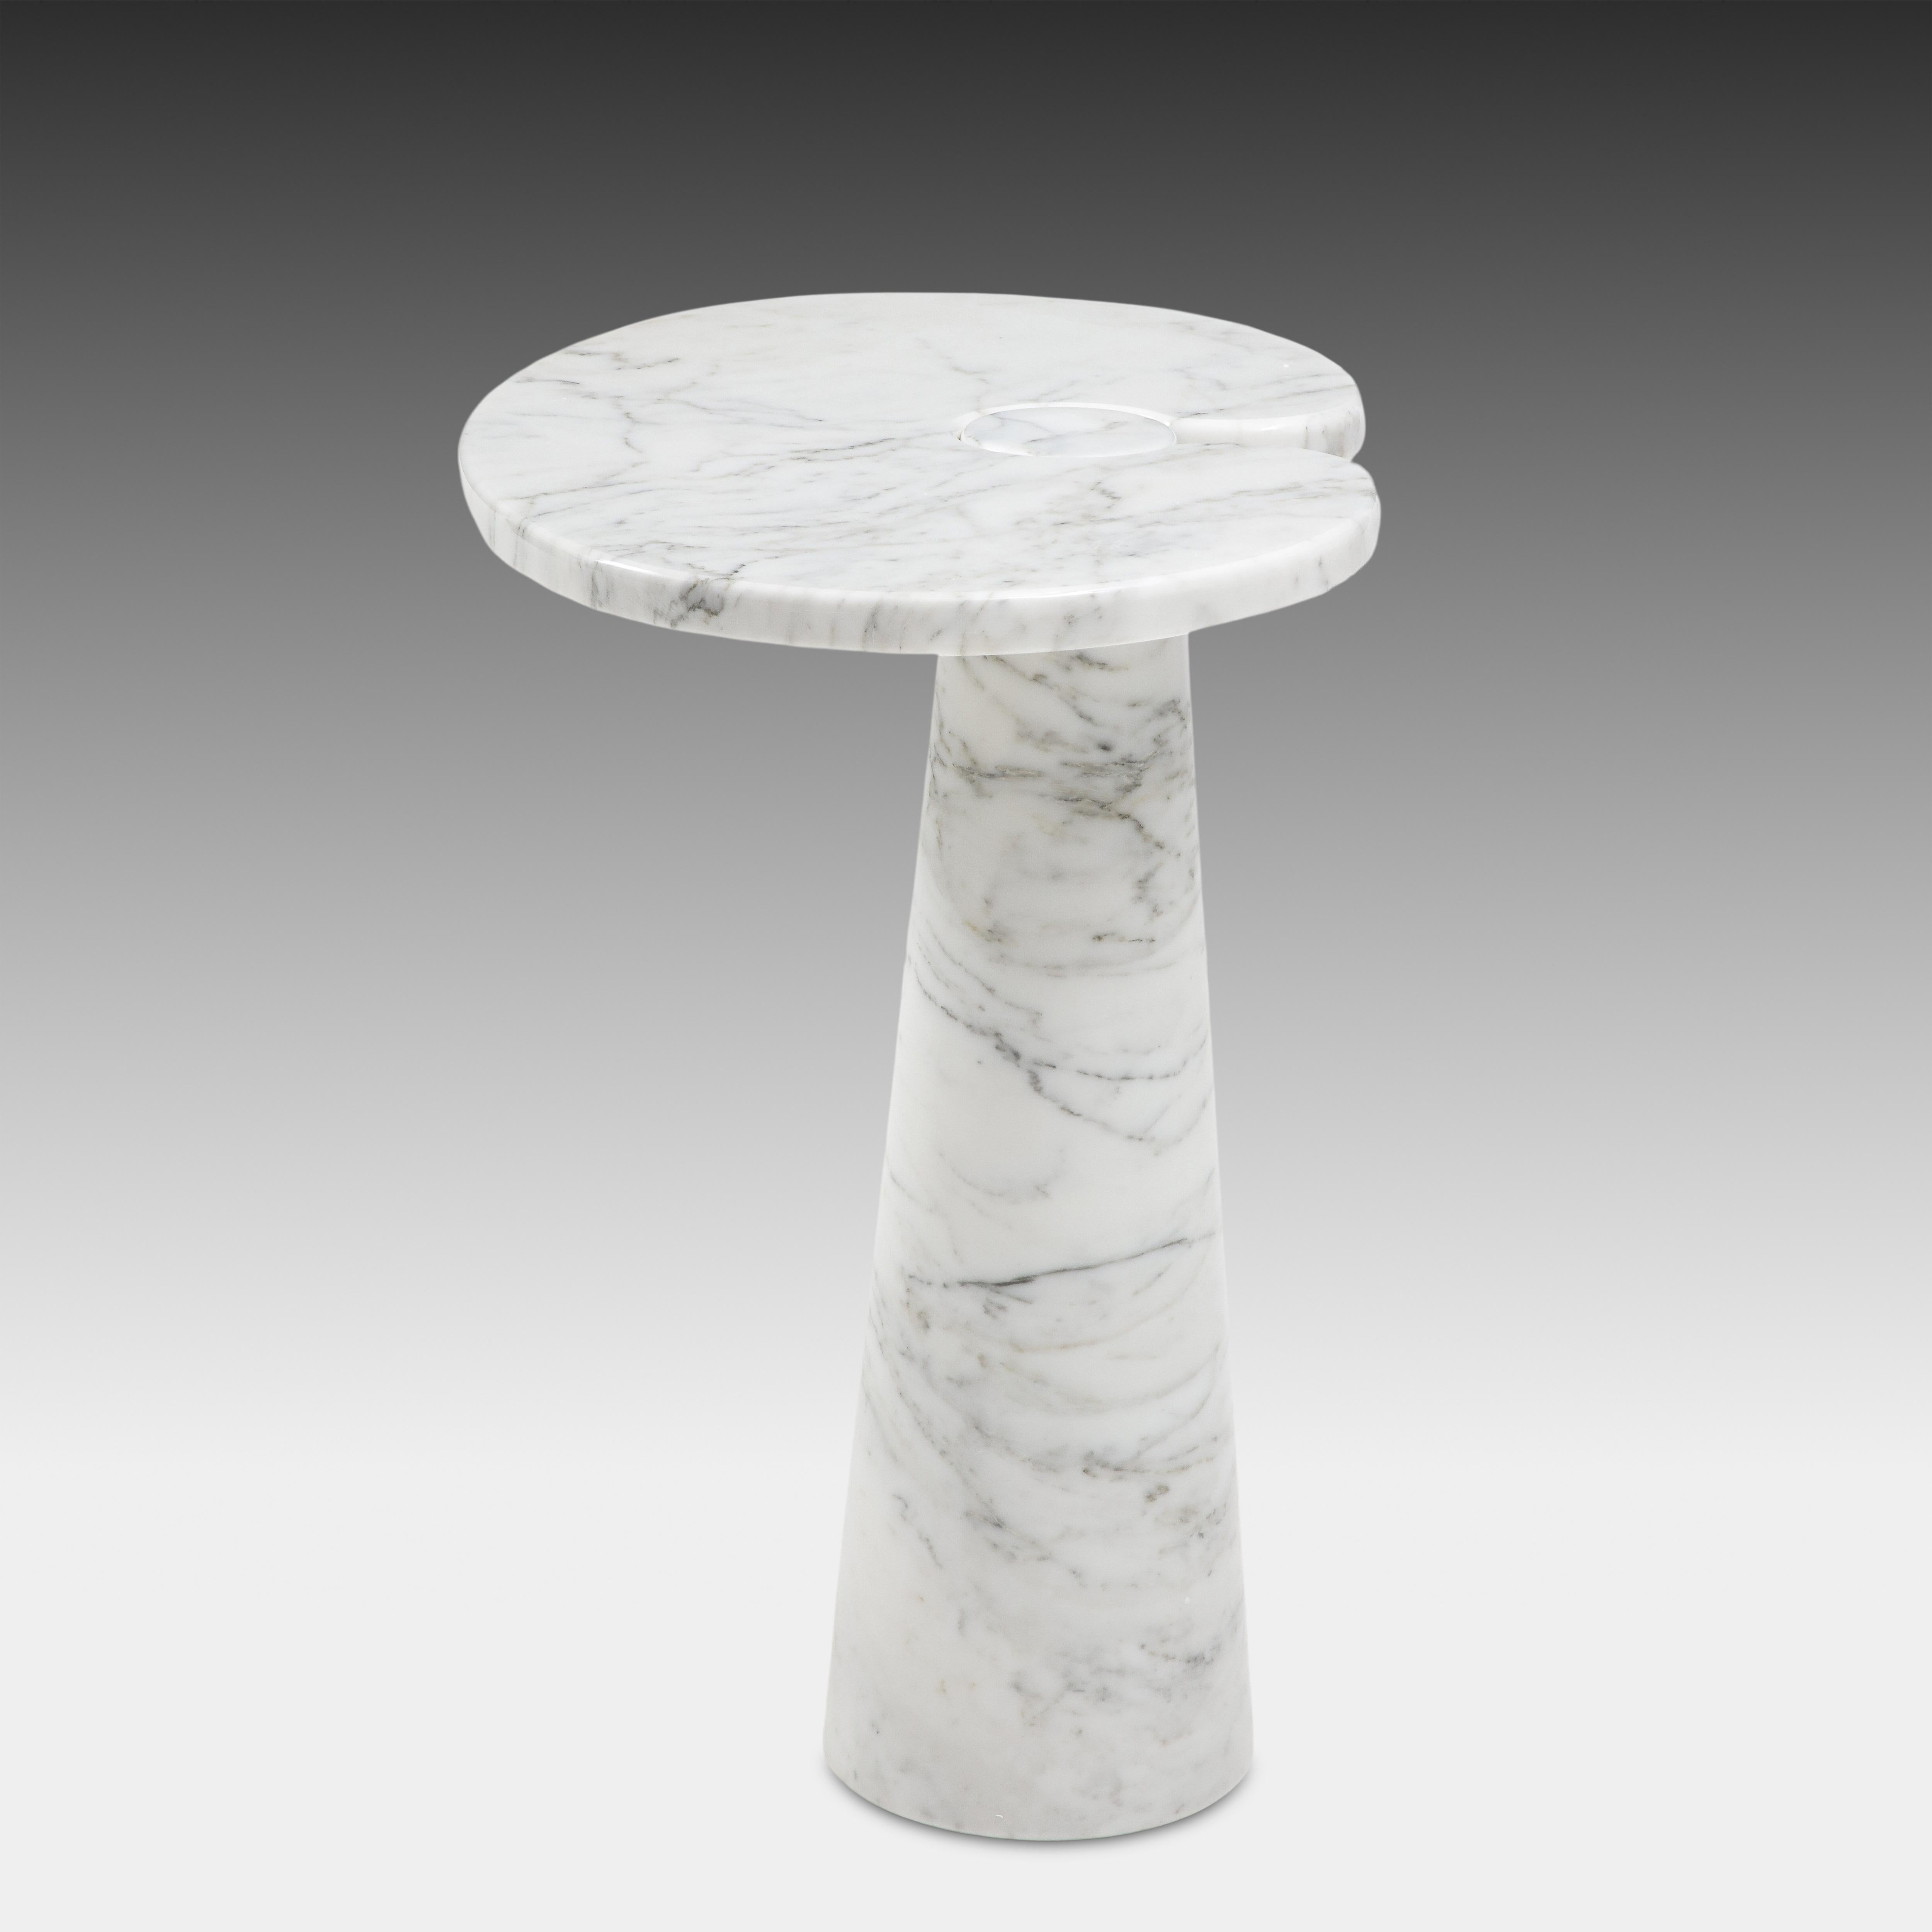 Polished Angelo Mangiarotti Carrara Marble Tall Side Table from Eros Series, 1971 For Sale